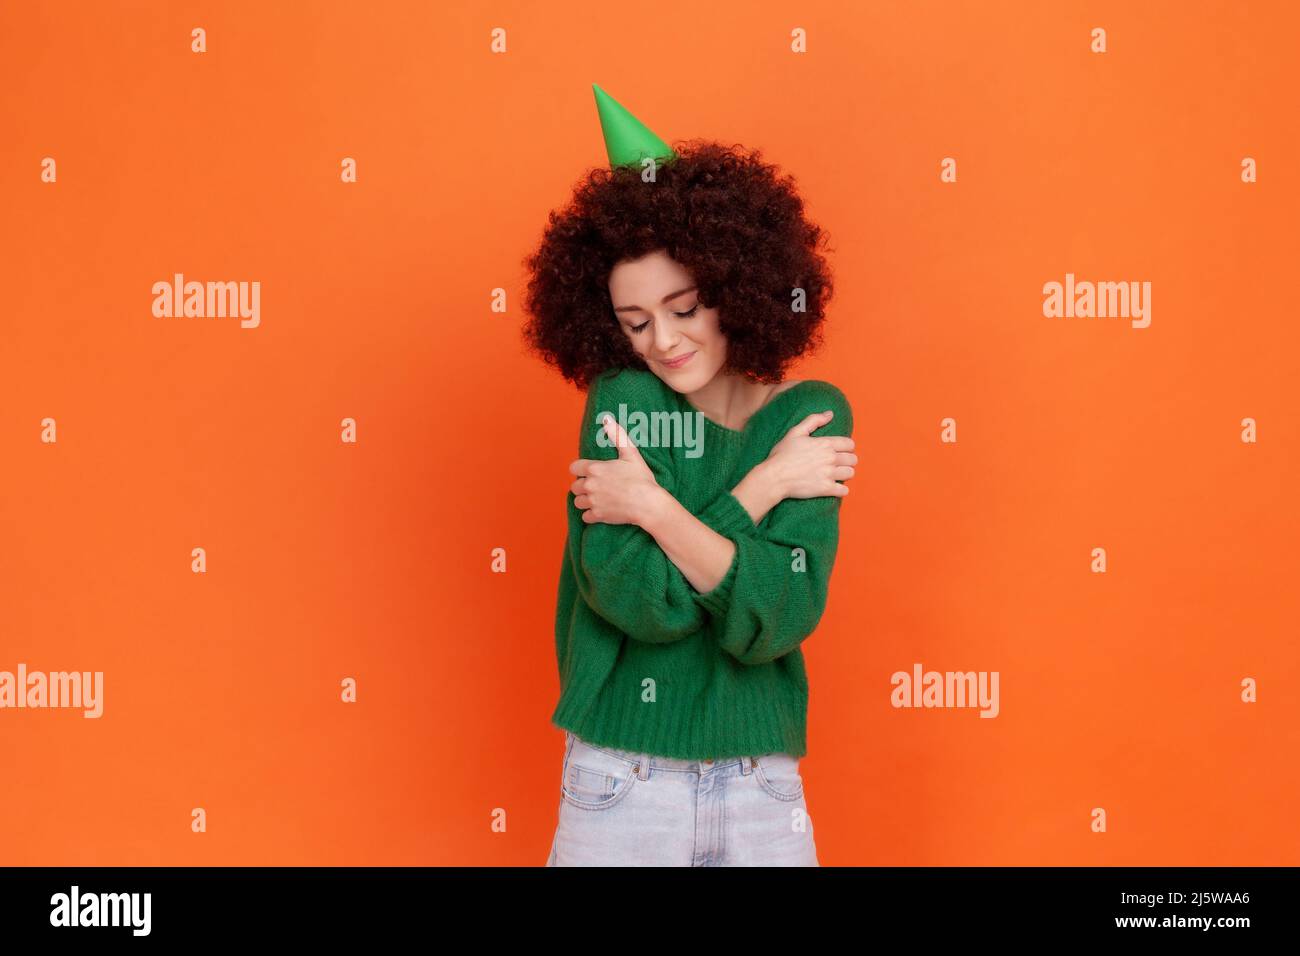 Kind birthday woman with Afro hairstyle wearing green casual style sweater and party cone, celebrating holiday, hugging herself, egoist. Indoor studio shot isolated on orange background. Stock Photo